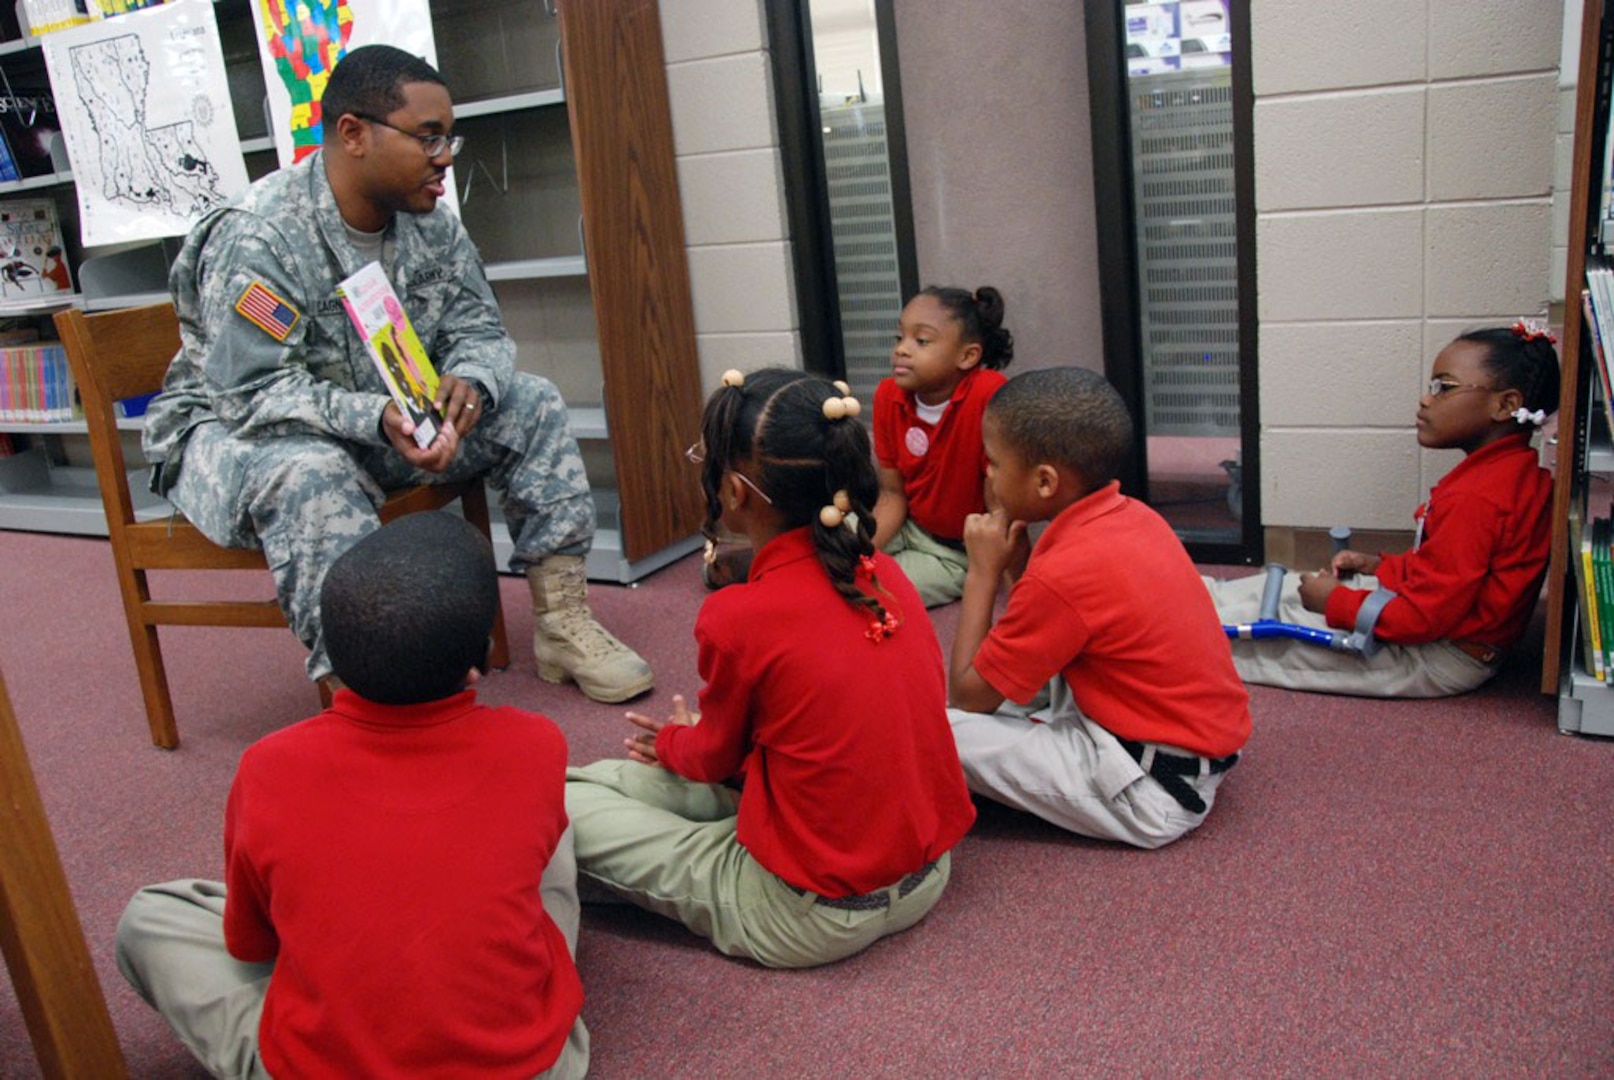 Louisiana Army National Guardsman Capt. Lance T. Cagnolatti reads to a groups of students at East Iberville School in St. Gabriel, La., as part of the "Real Men Read" program that teaches kids the importance of reading.